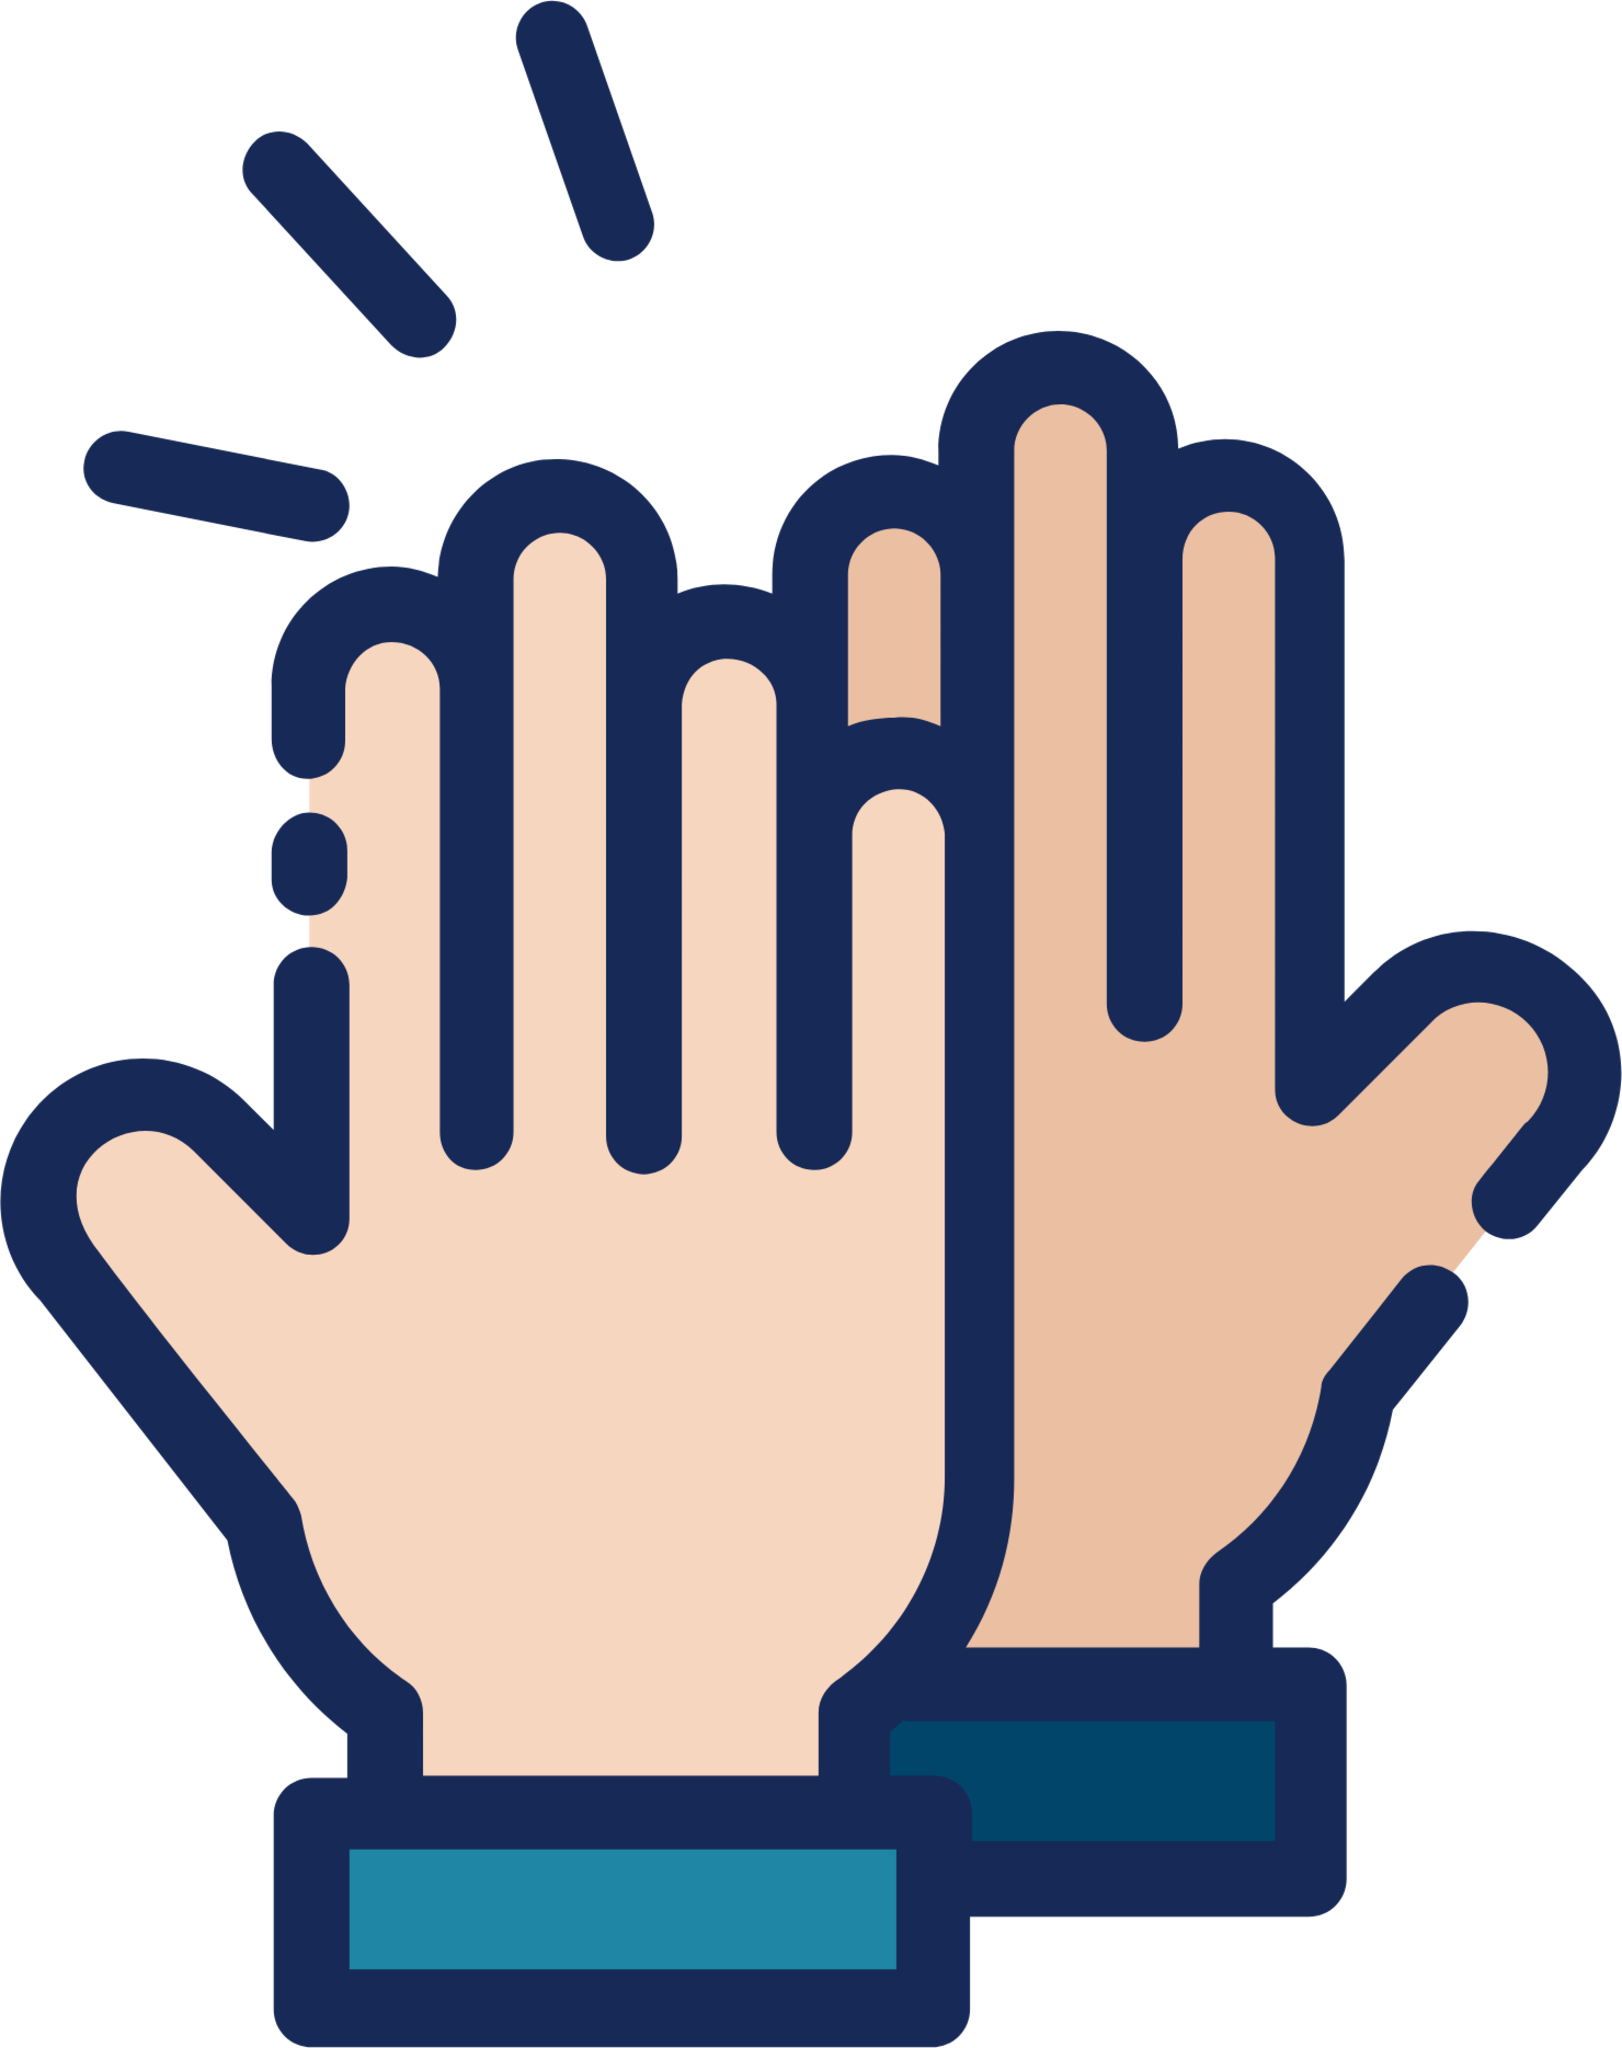 high five icon